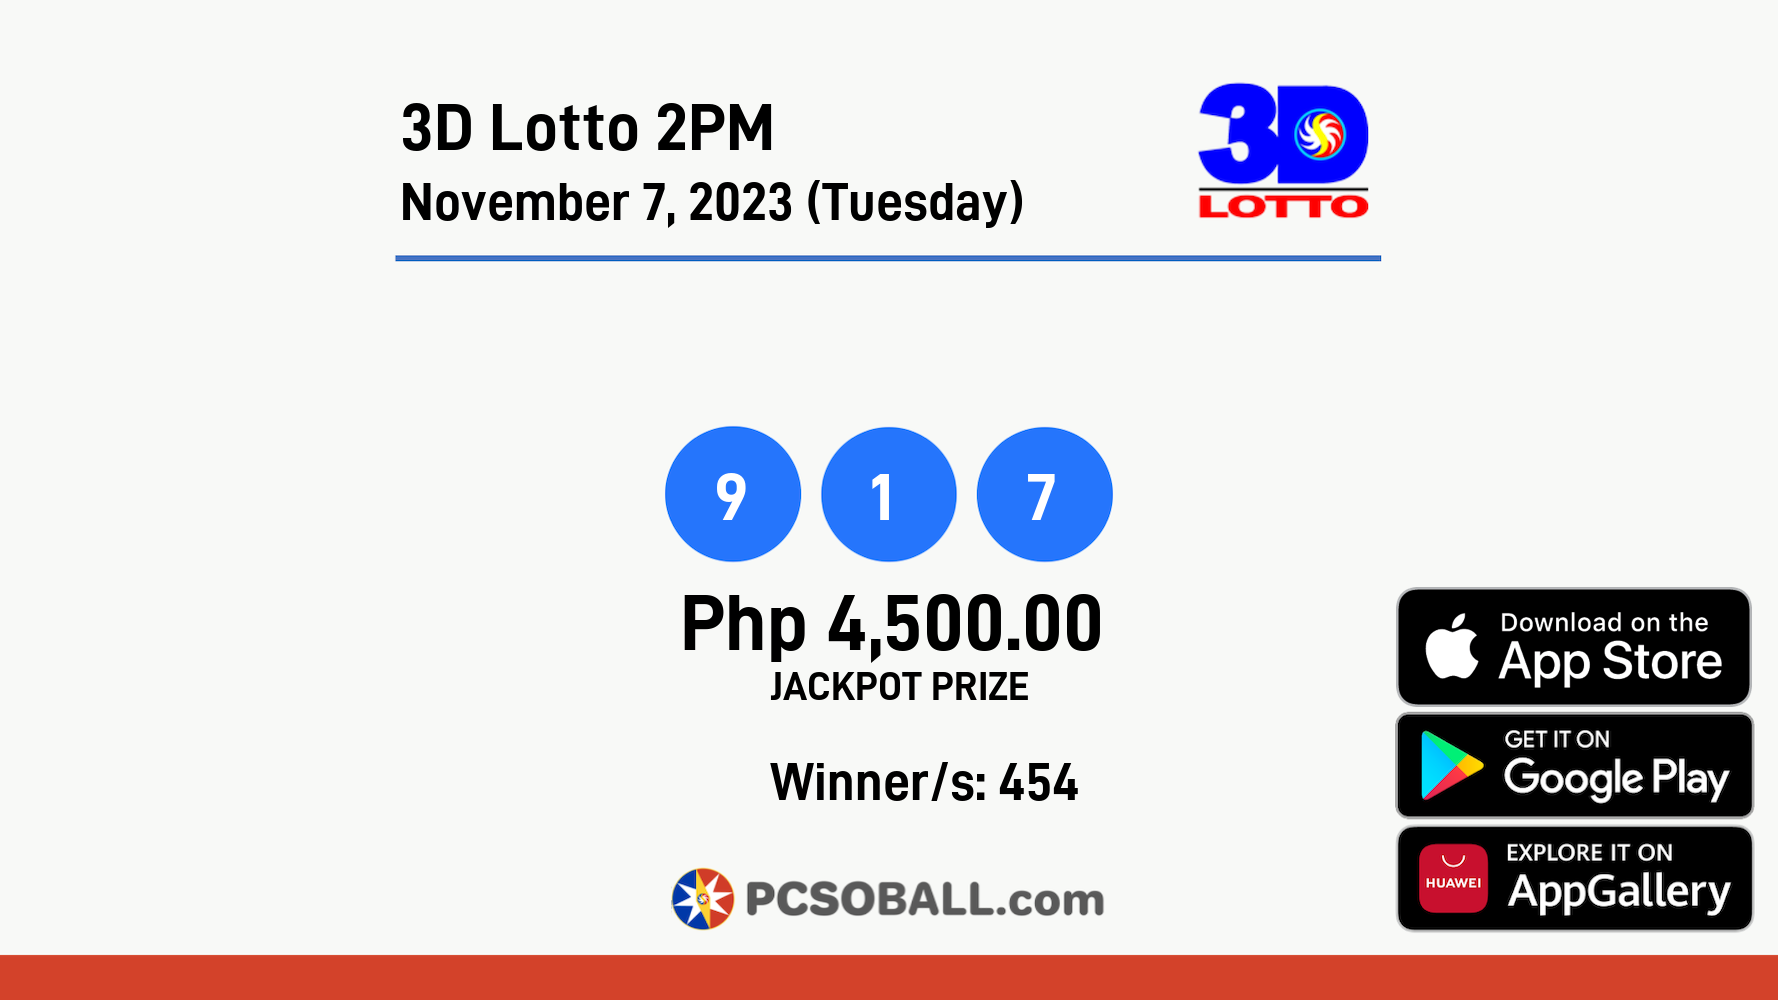 3D Lotto 2PM November 7, 2023 (Tuesday) Result